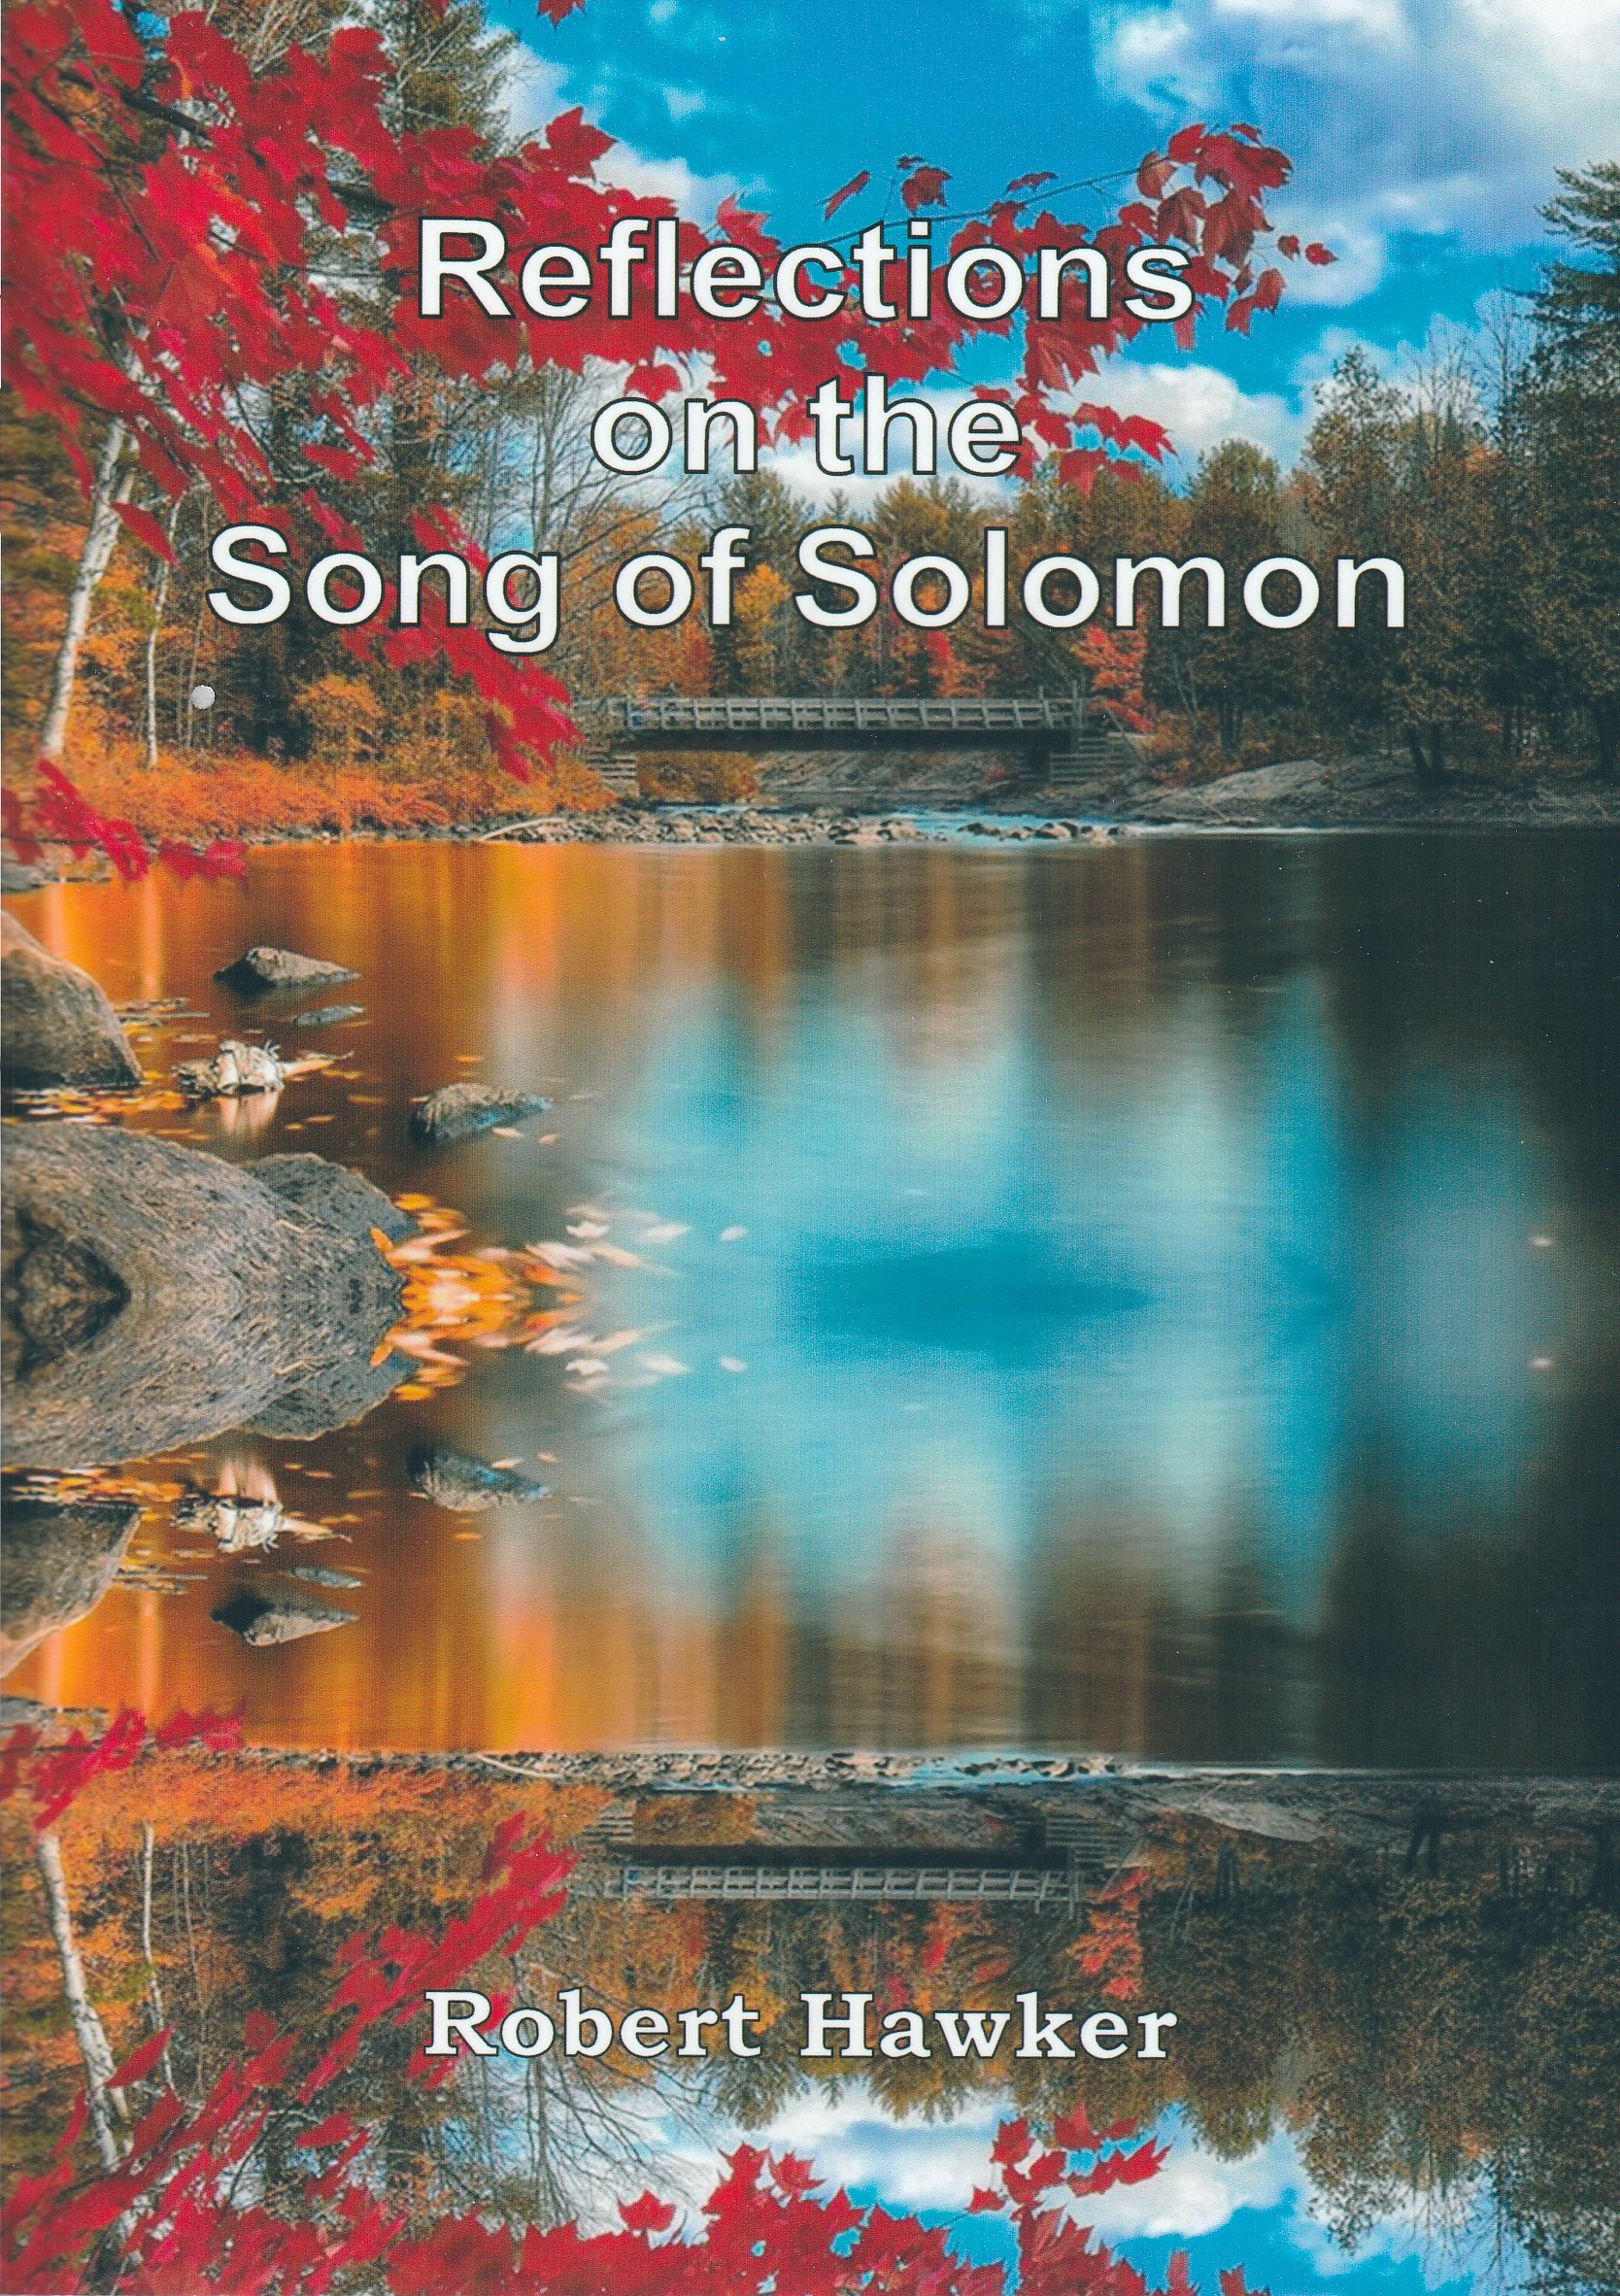 Reflections on the Song of Solomon